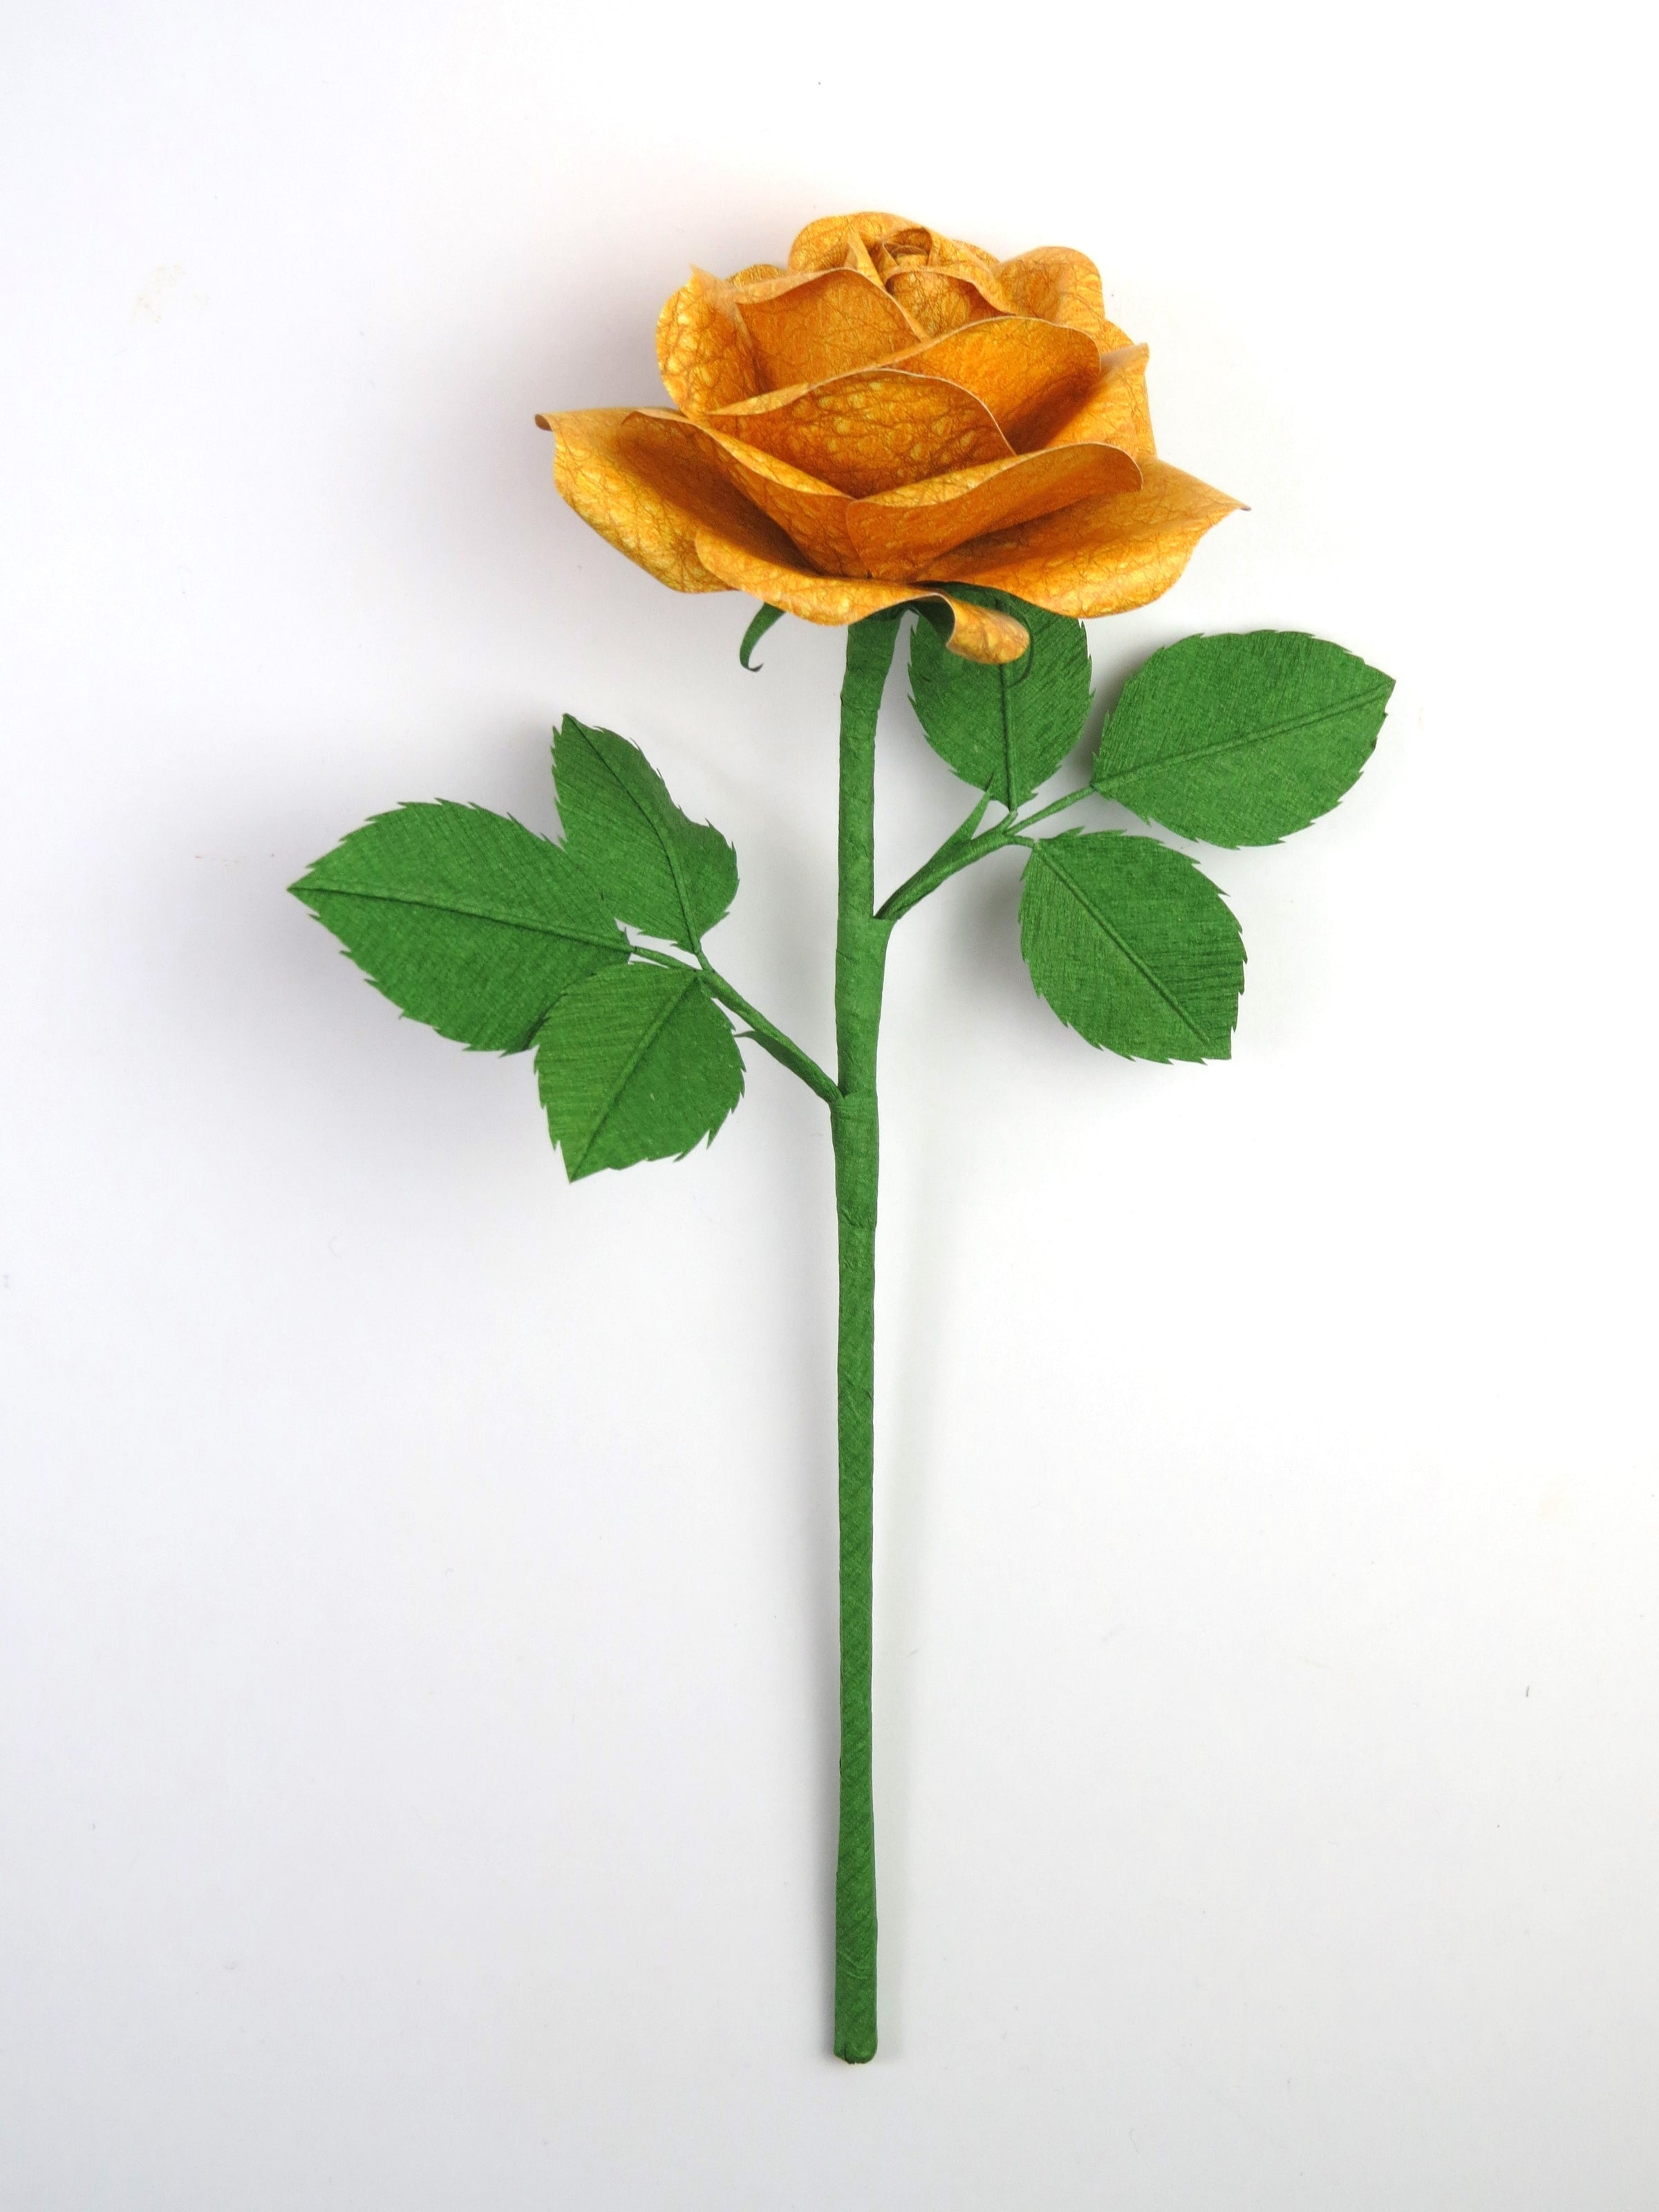 Bright yellow leather grain paper rose lying in a vertical position with 6 ivy green crepe paper leaves